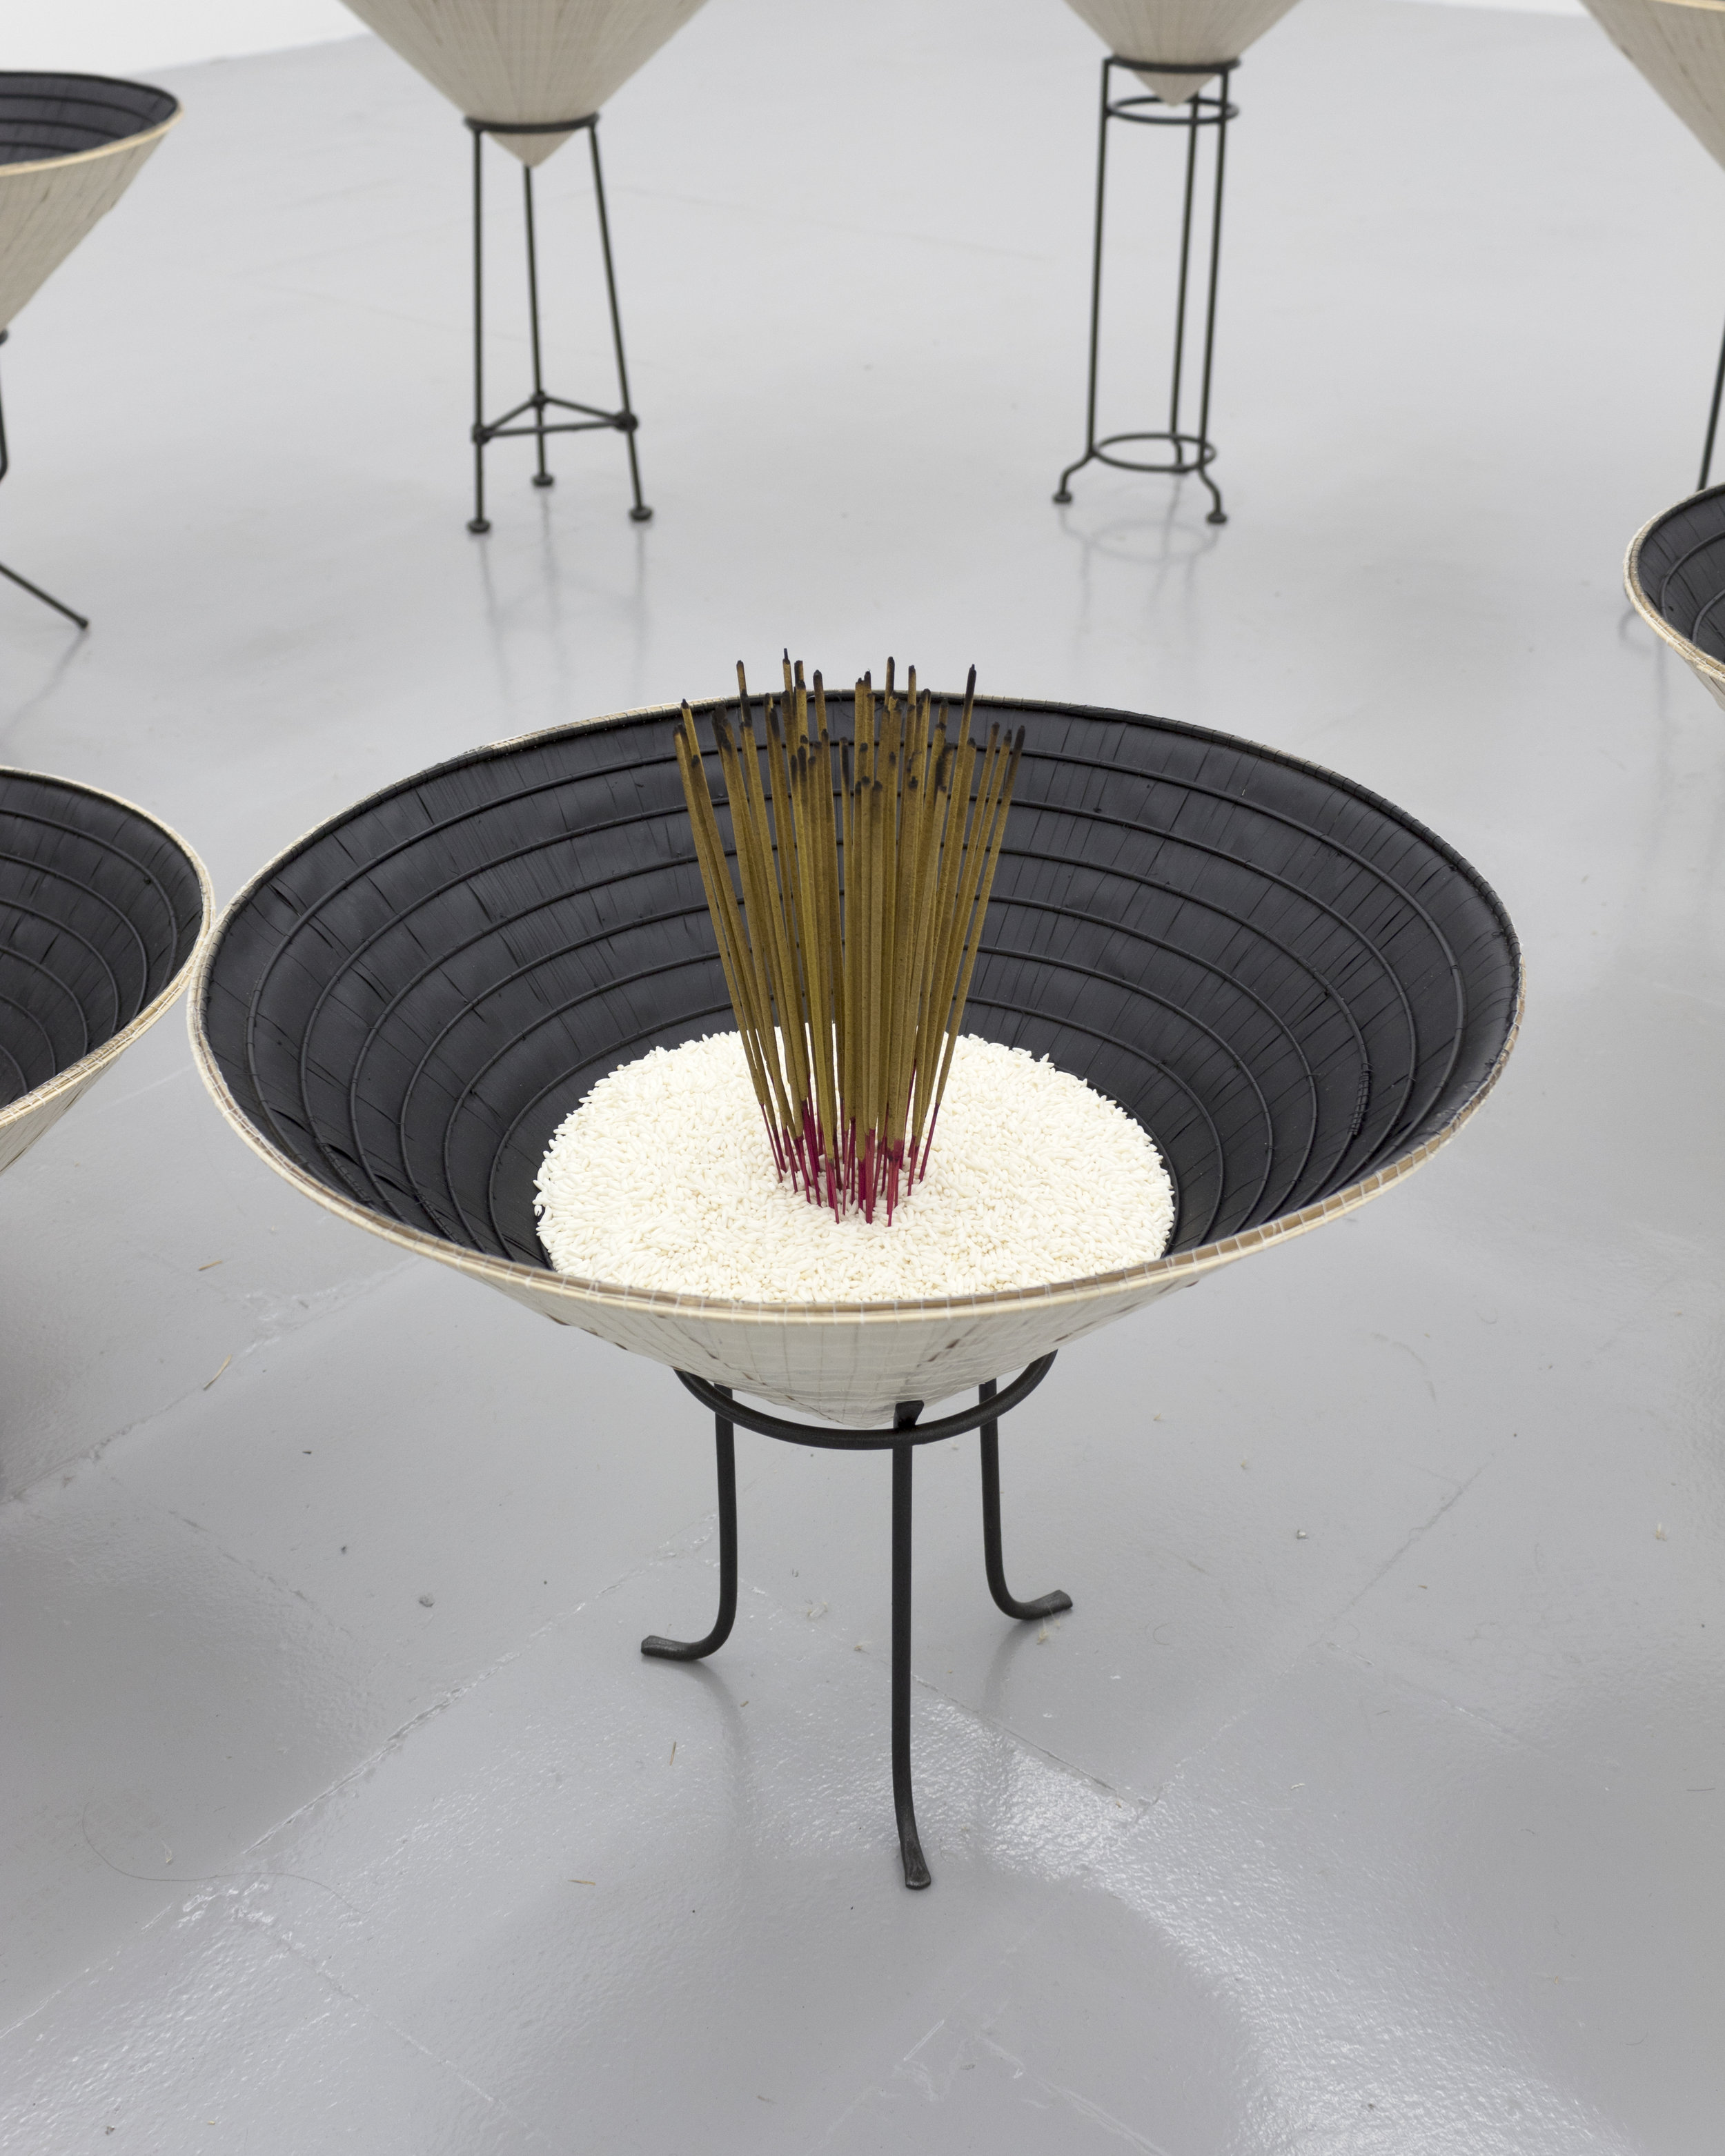  Millian Giang Lien Pham,  Reforge: 9 Phases (Two),  2019. Conical hat, sweet rice, incense, metal stand 